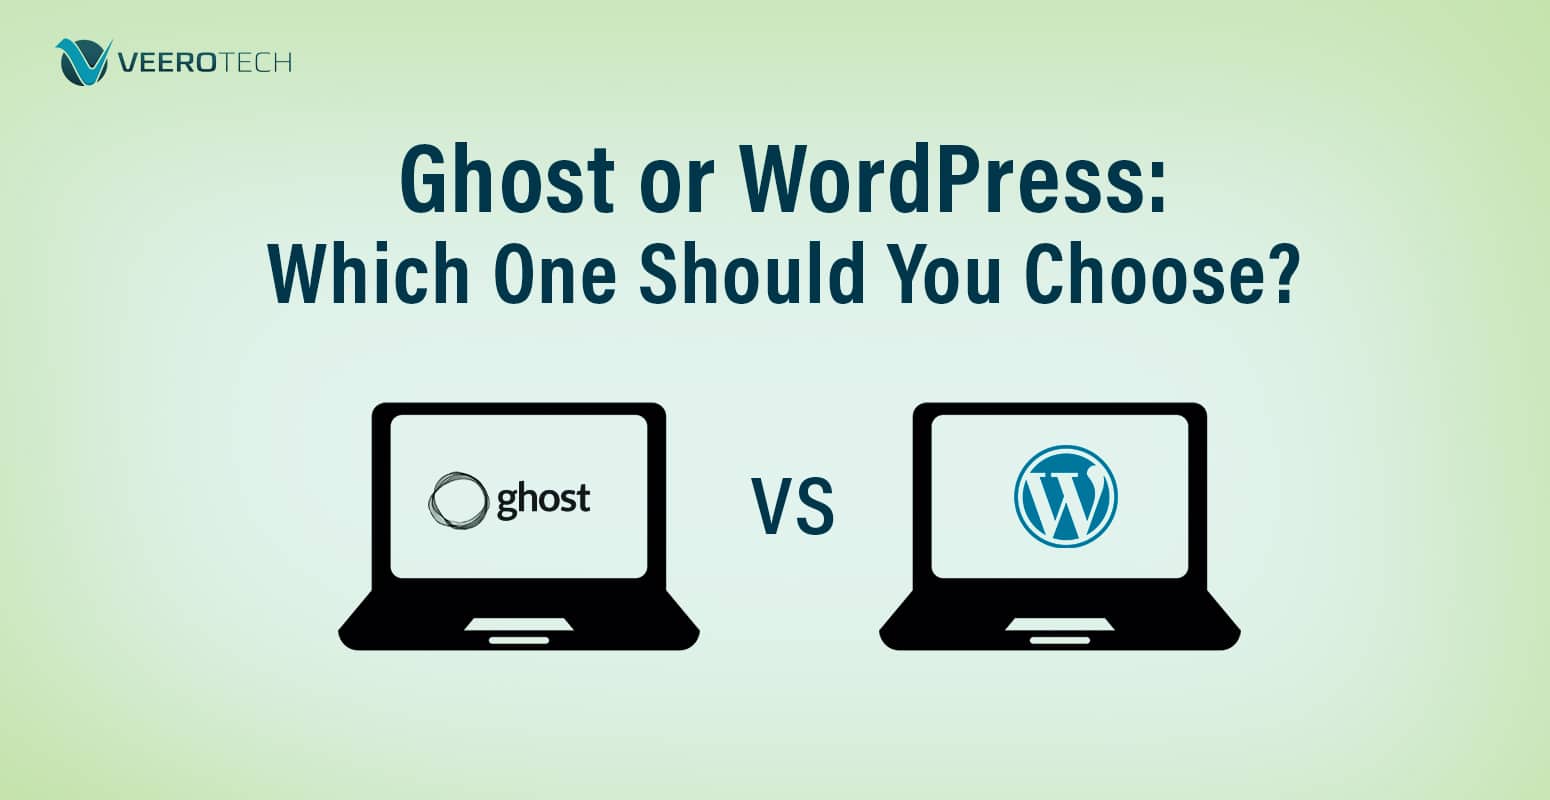 Ghost or WordPress: Which One Should You Choose